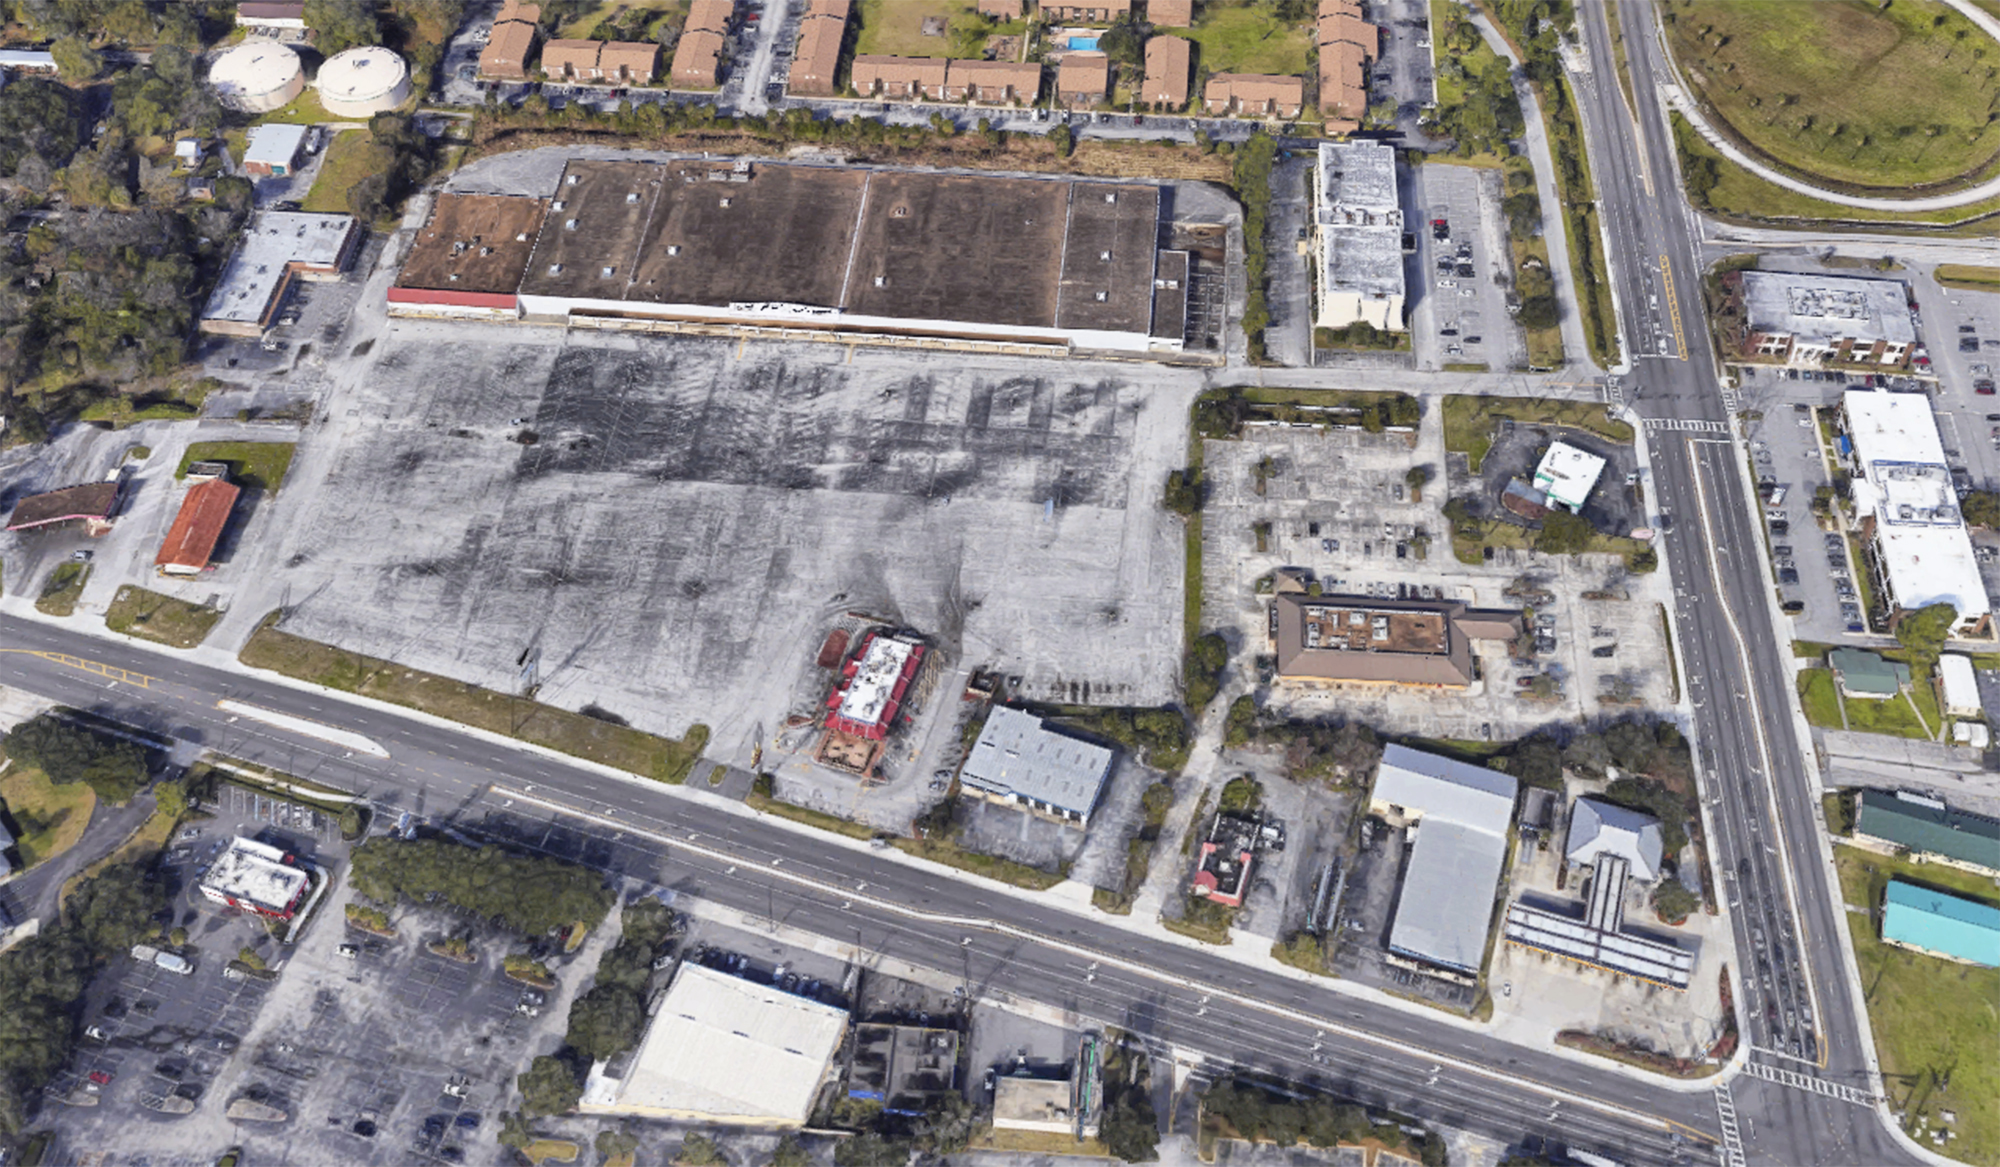 The former Kmart building and site at 5751 Beach Blvd. that is planned for redevelopment. (Google)